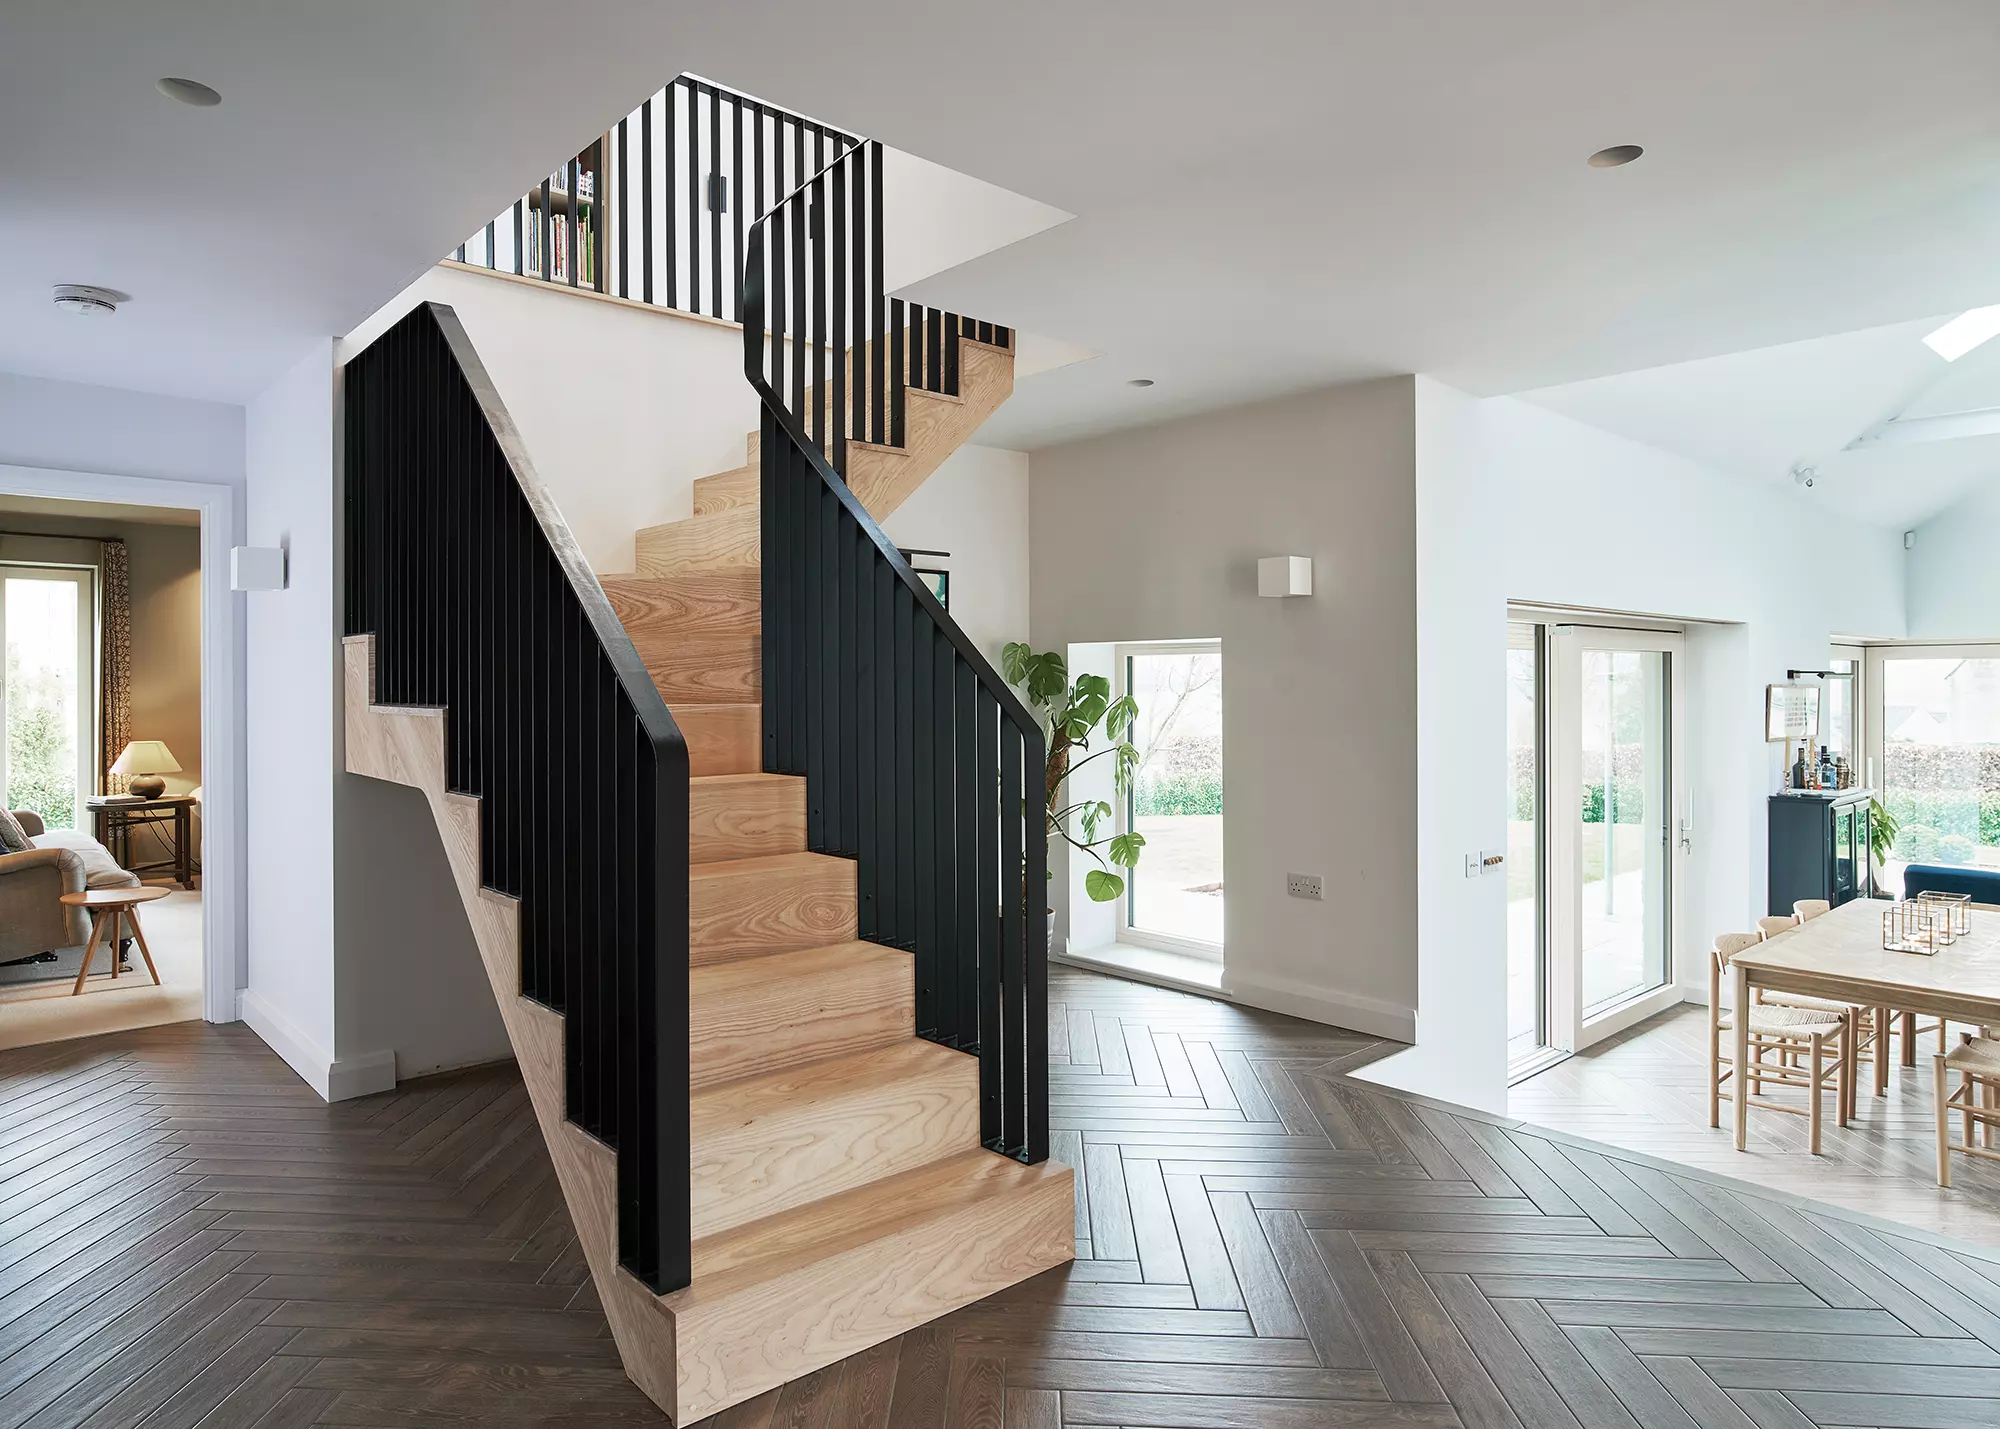 26 Staircase Ideas: How Staircase & Design Your Plan to Perfect